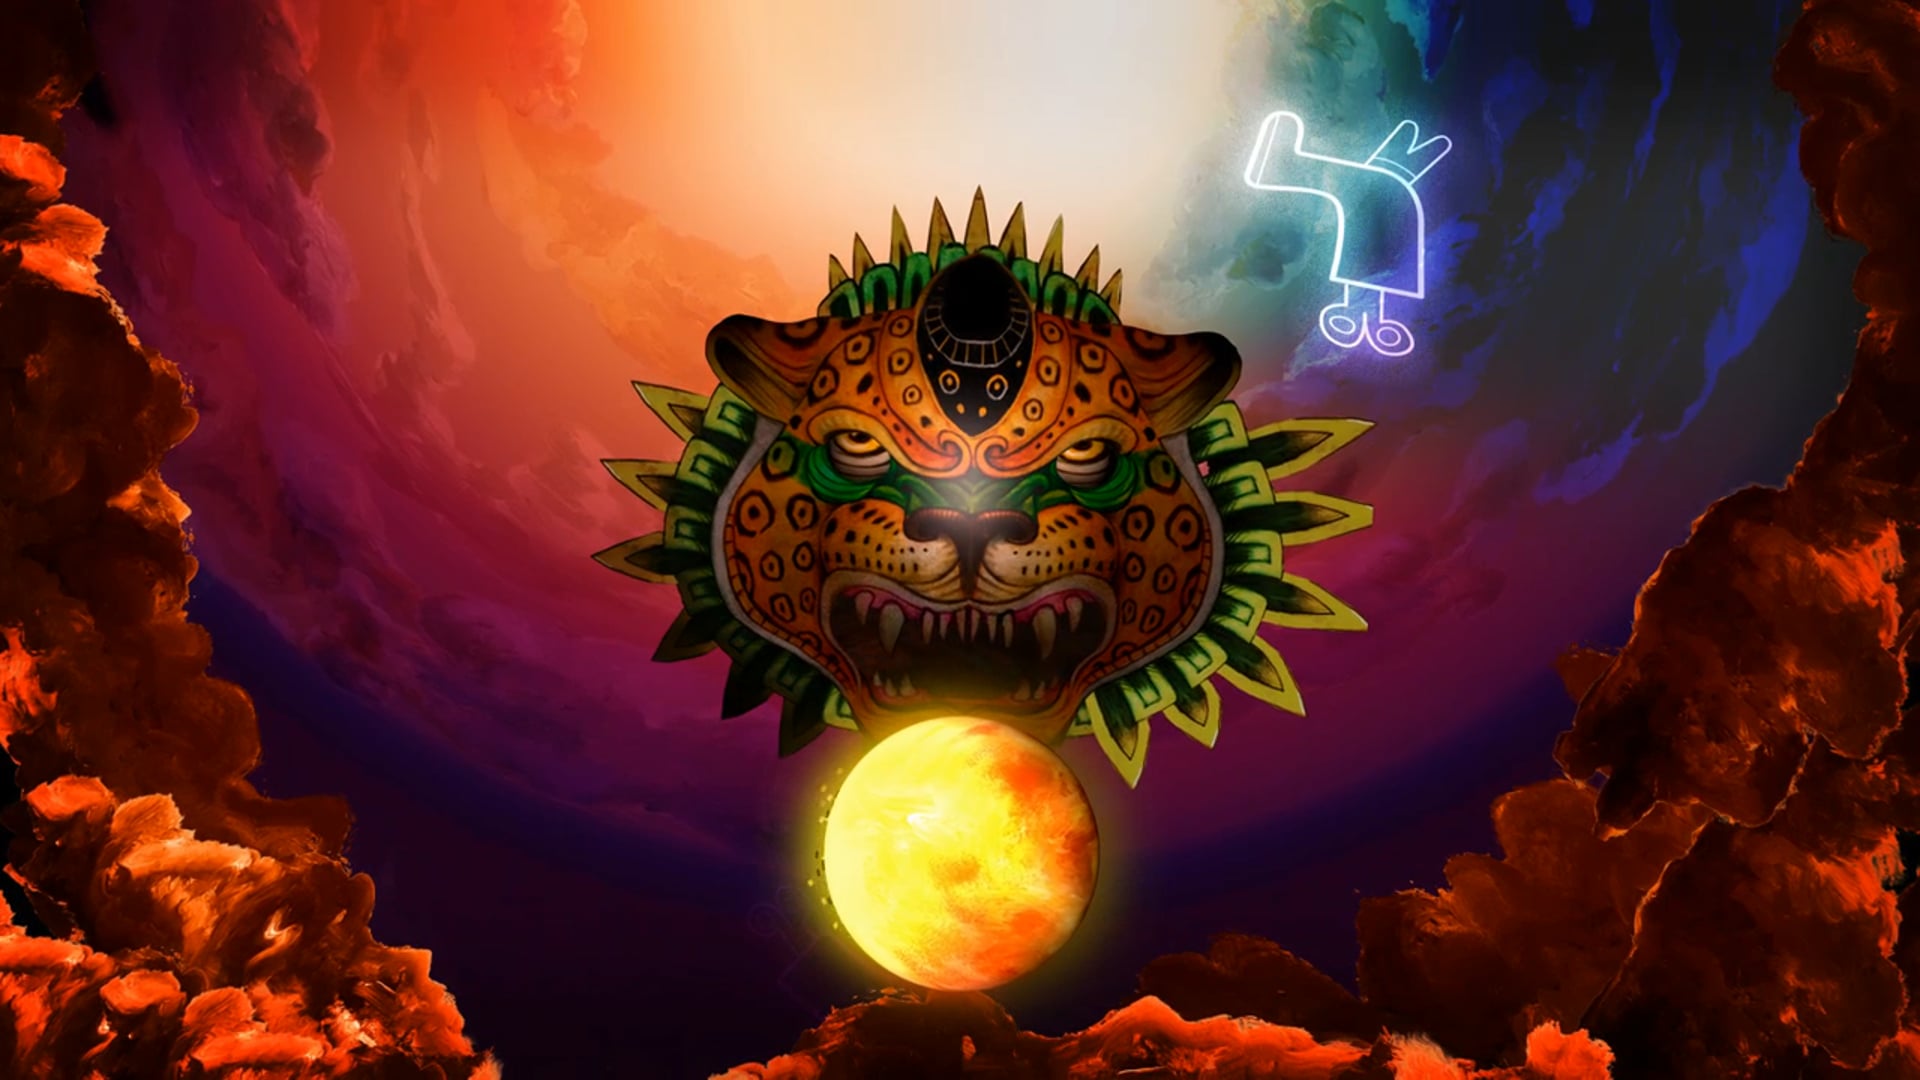 Aztec Archaeostronomy: Among Space and Time (TEASER HQ)